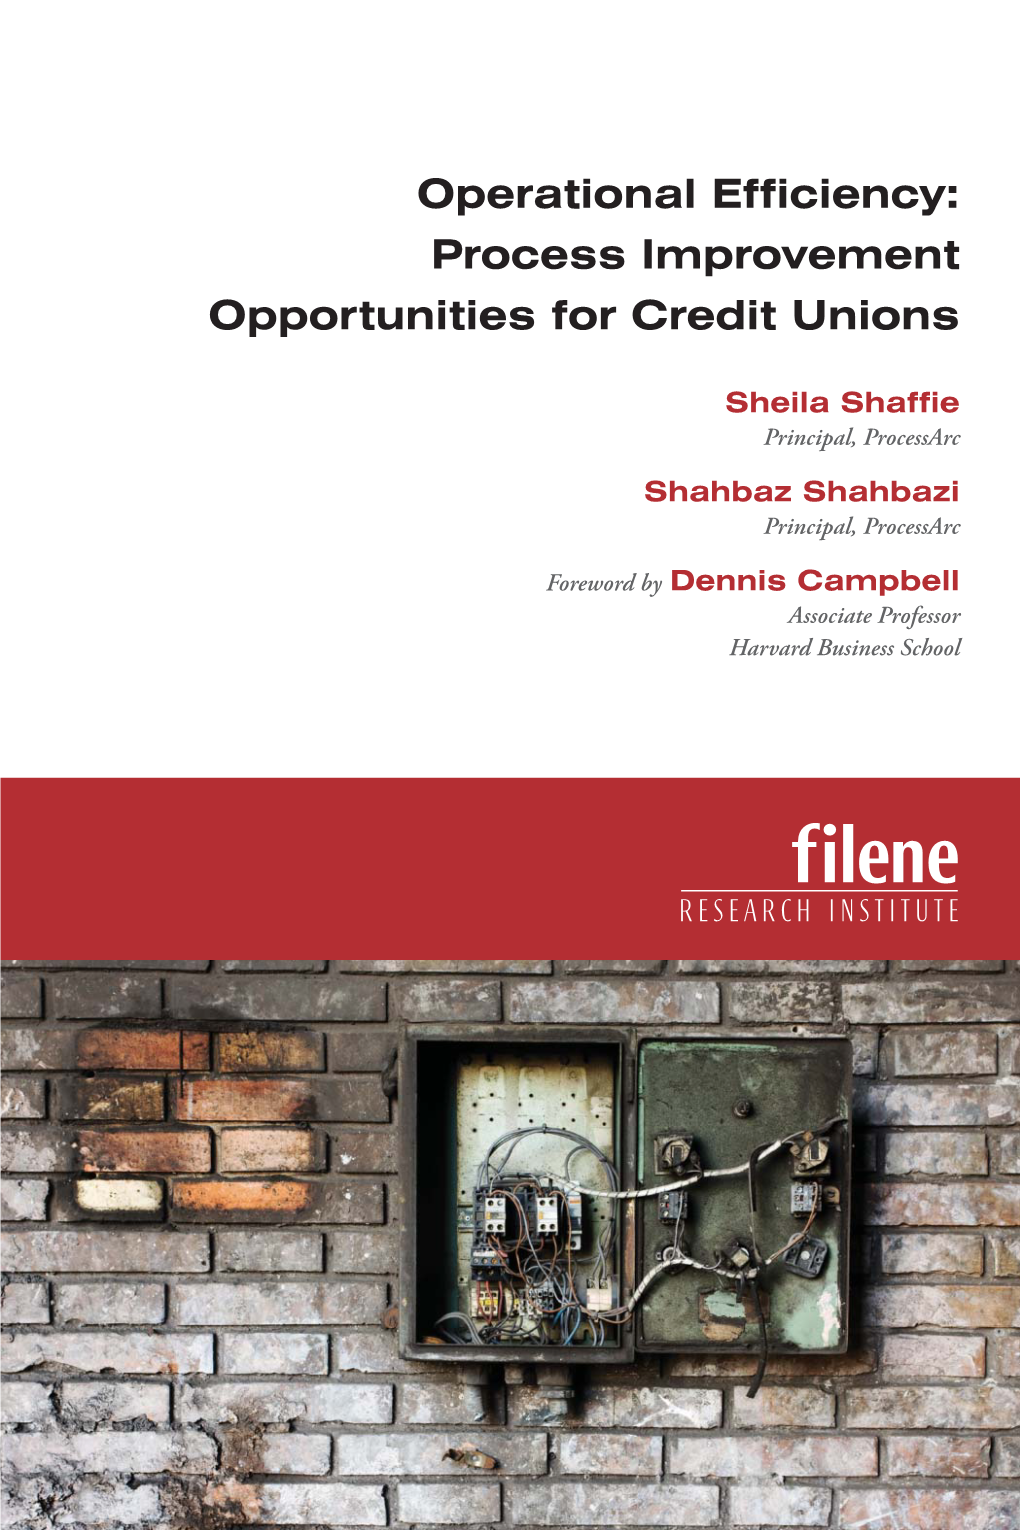 Operational Efficiency: Process Improvement Opportunities for Credit Unions